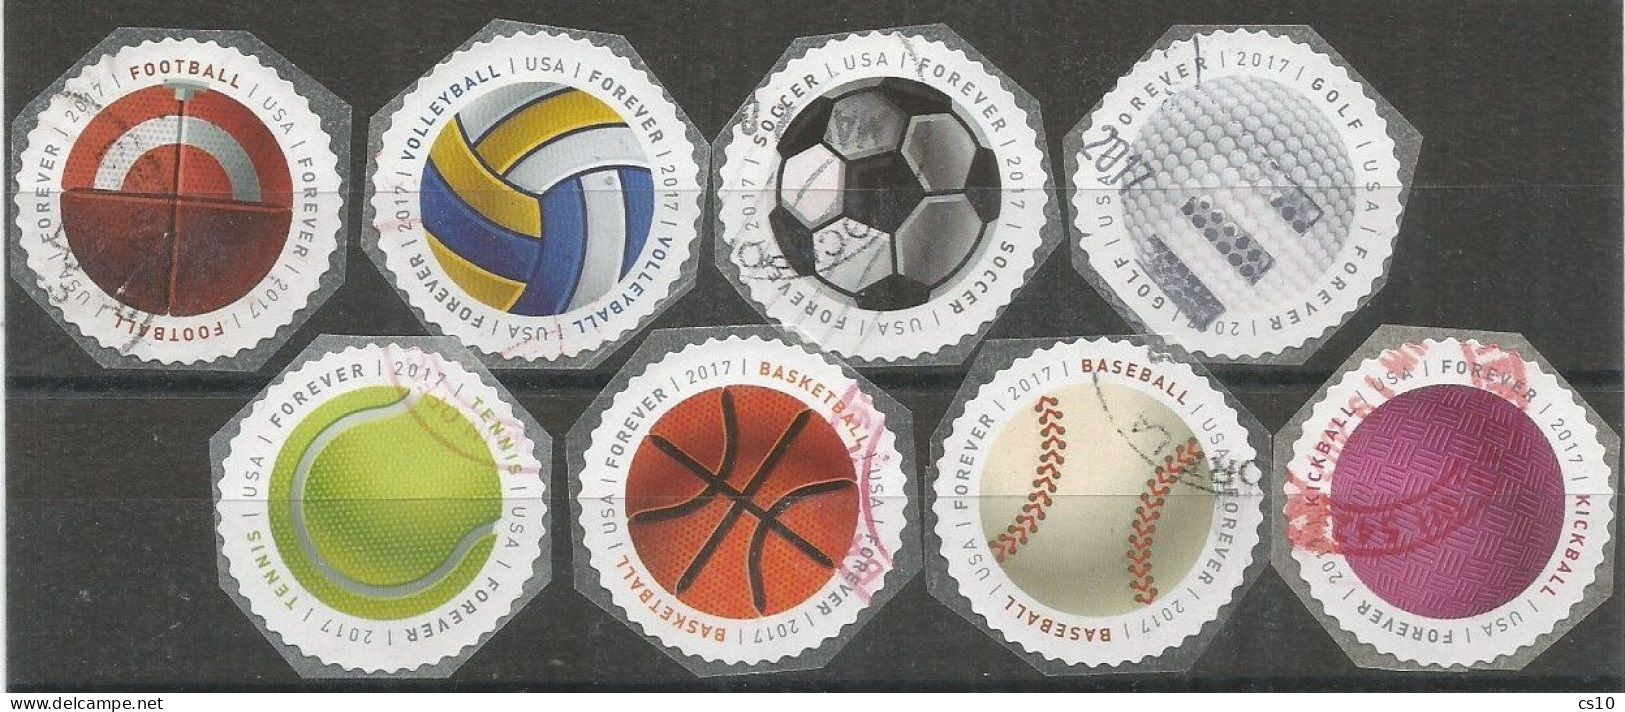 USA 2017 Balls For Playing Sports SC 5203/10 MI 5396-403 YT 5019-26 - Cpl 8v Set - VFU Condition - Annate Complete